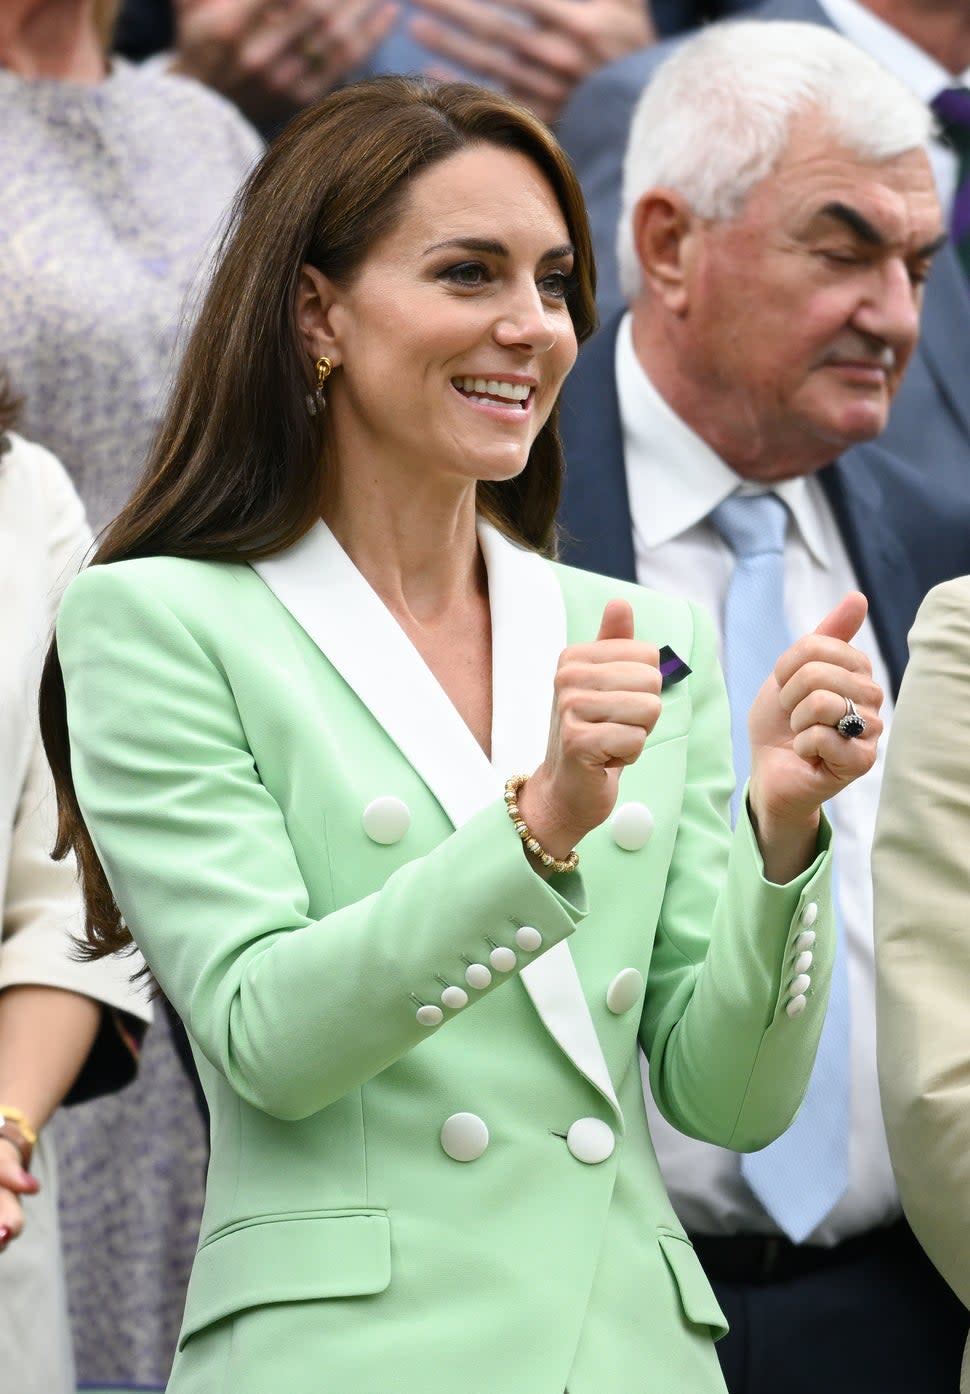 Kate Middleton takes in the tennis match during day two of Wimbledon